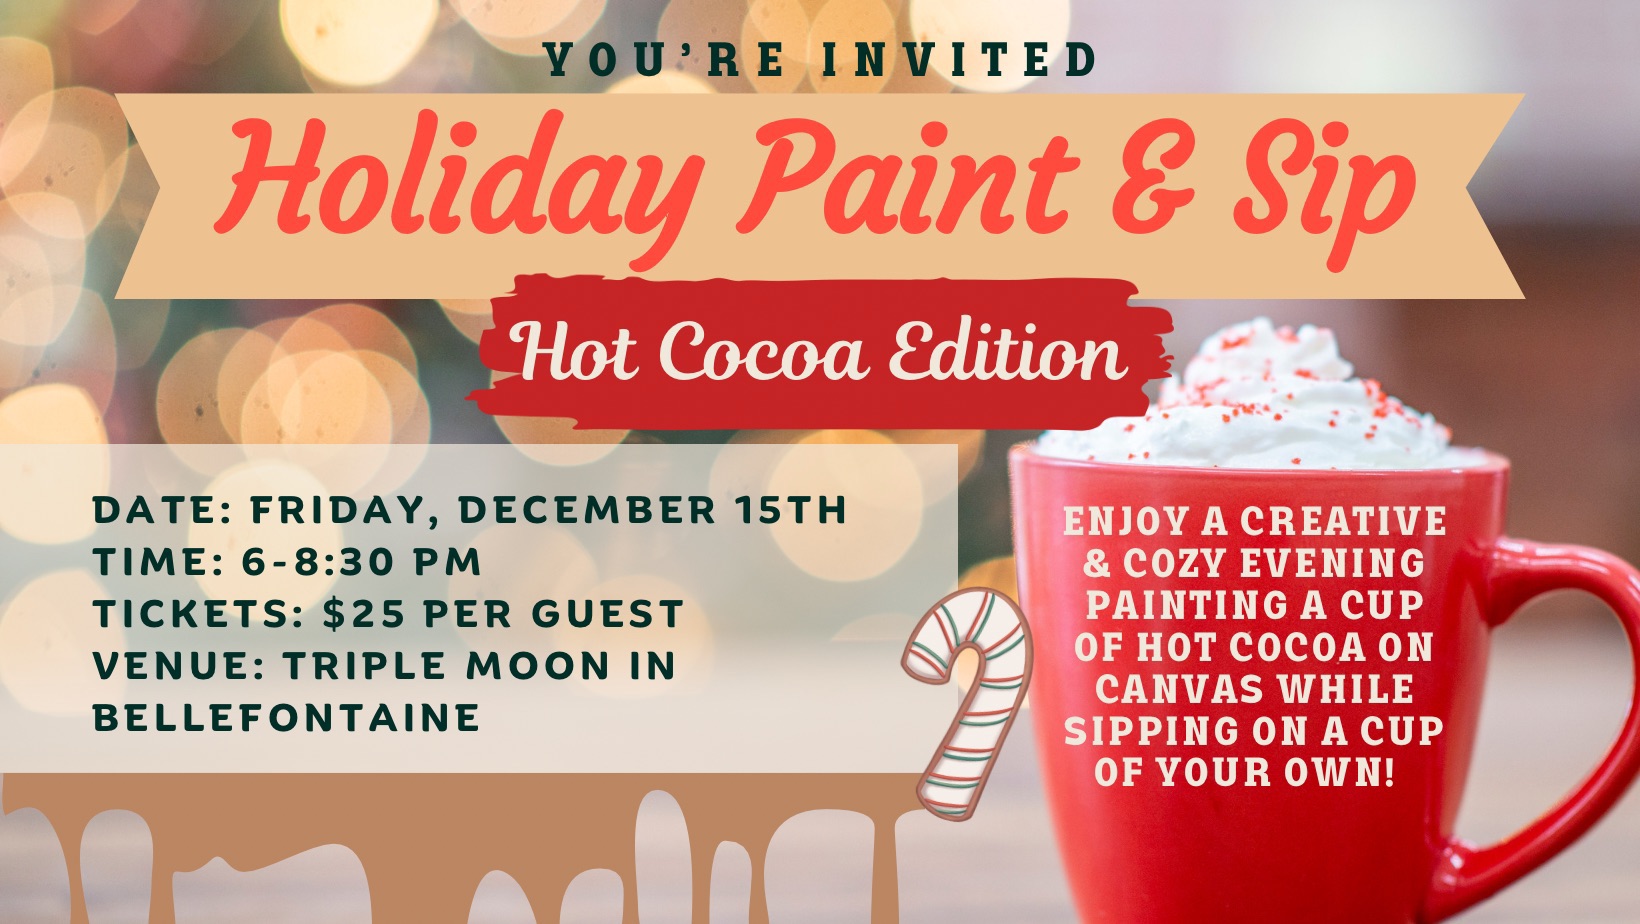 Holiday Paint & Sip – Hot Cocoa Edition